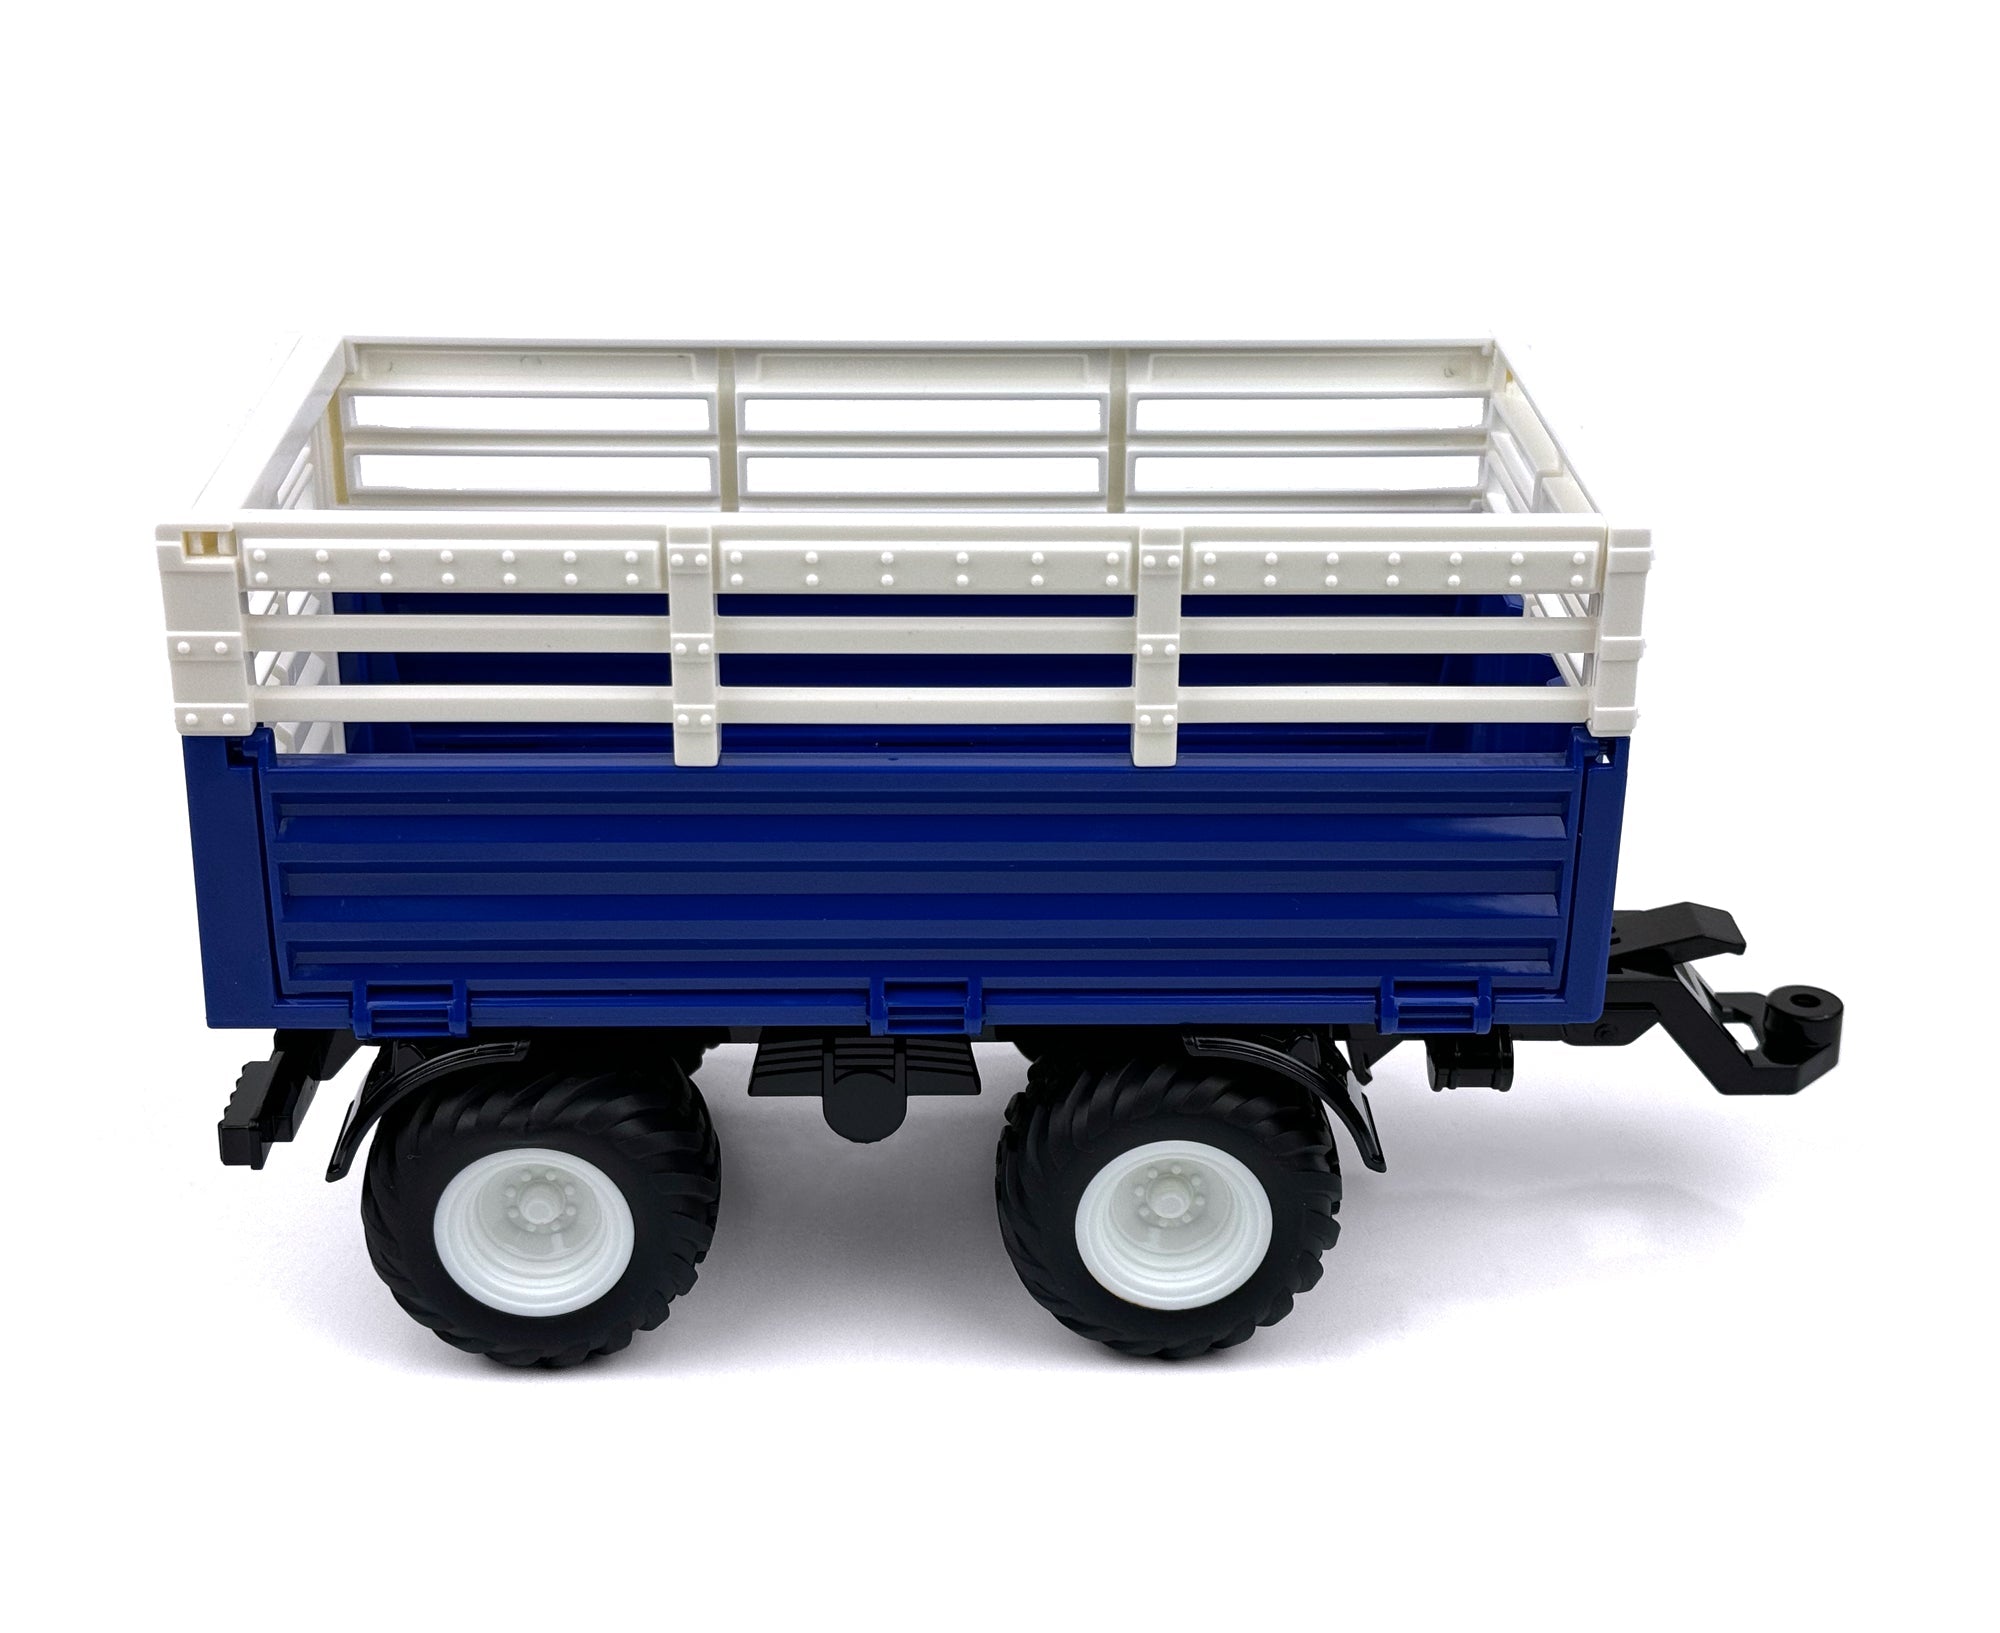 1:24 Scale R/C Tractor & Trailer Combo | bigcountrytoys.com